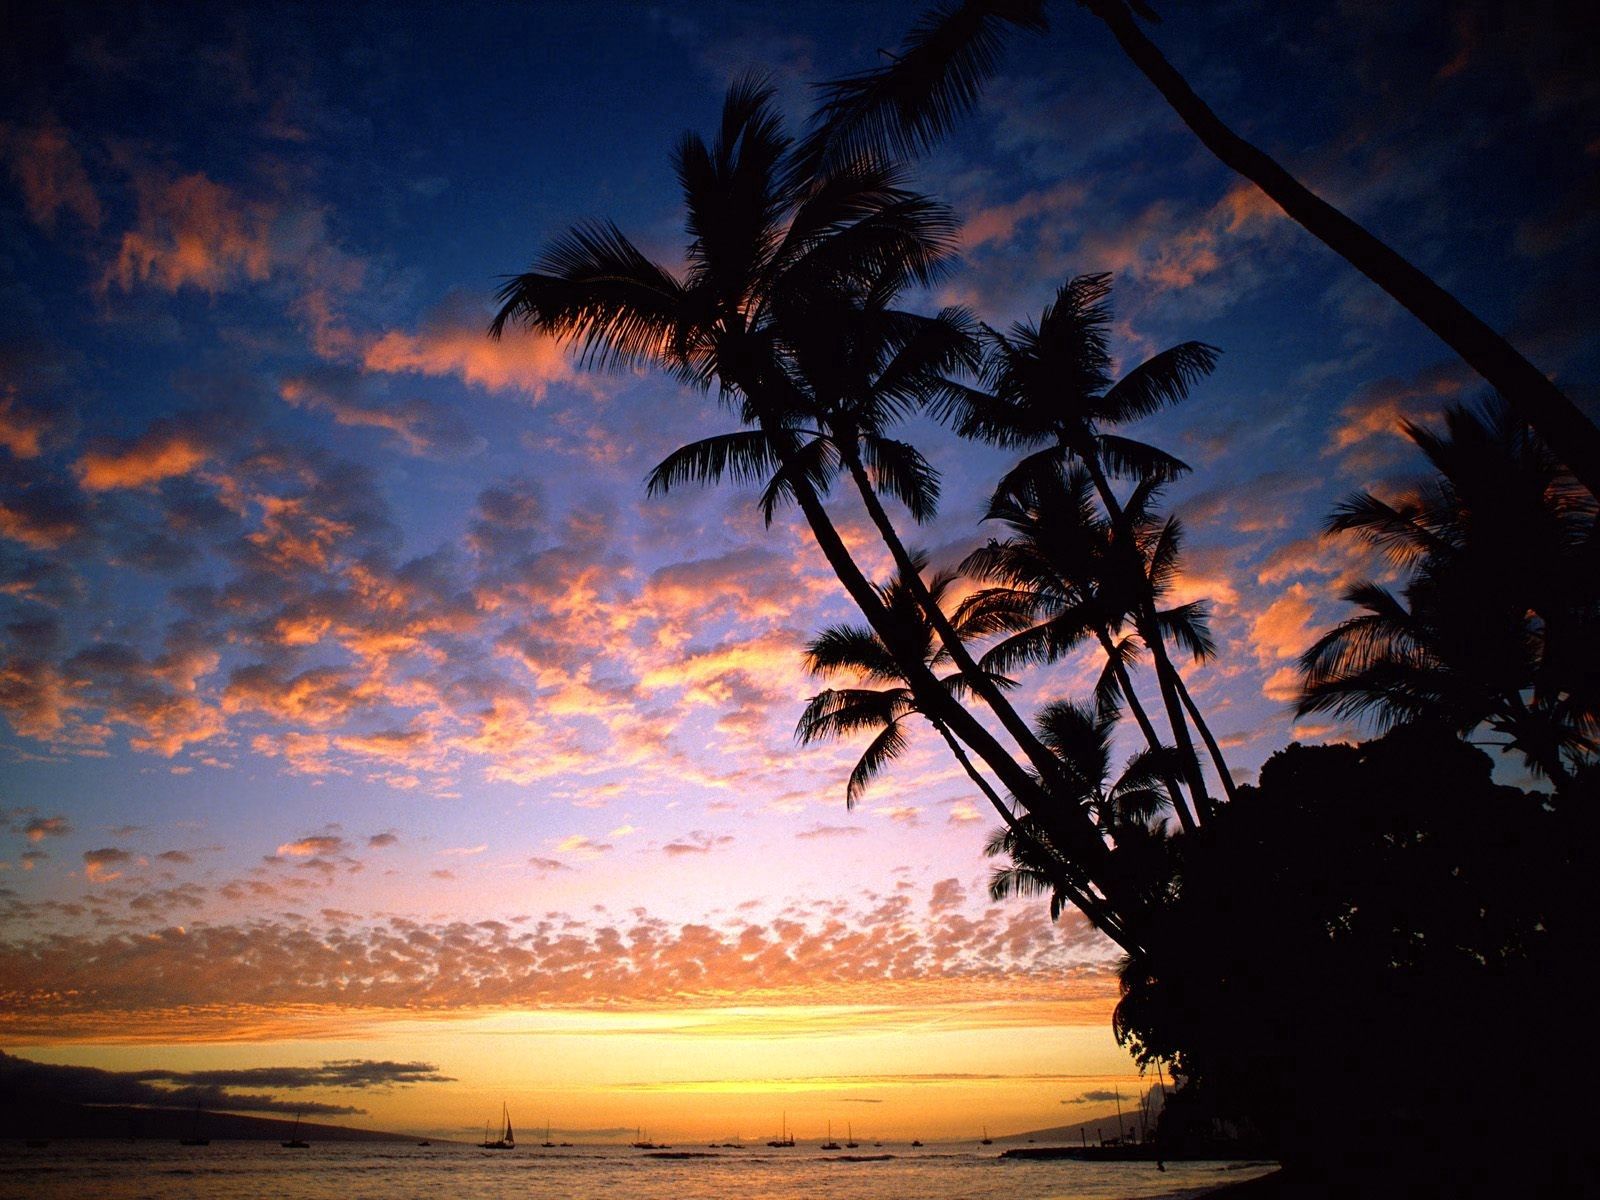 palms, shore, bank, outlines, silhouettes, evening, hawaii, sky, nature, sea, ships Full HD